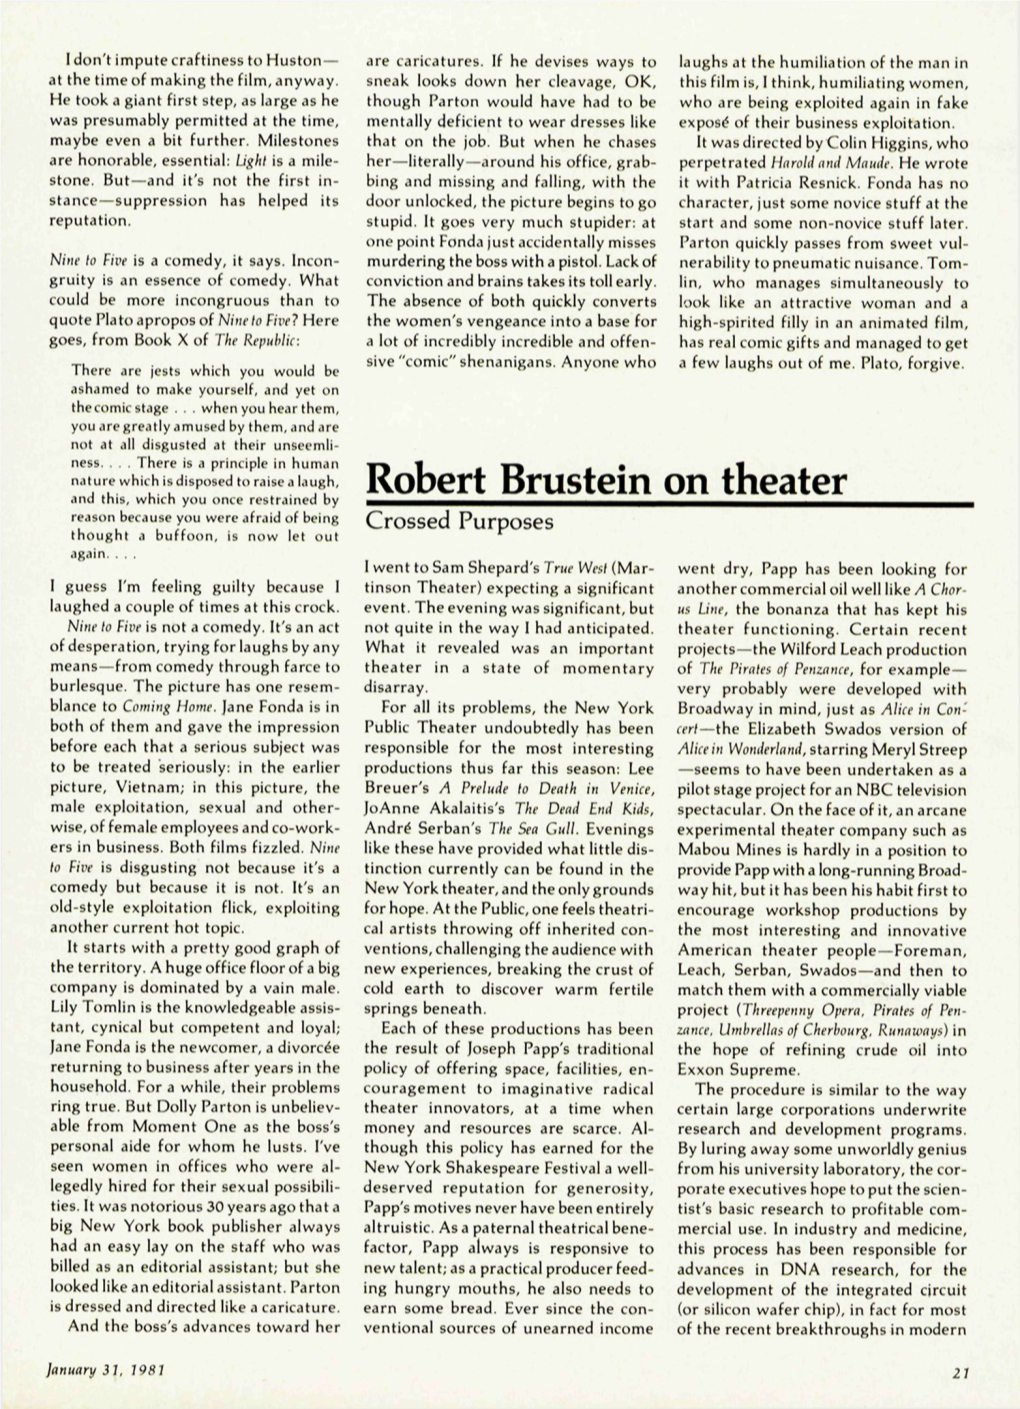 Robert Brustein on Theater Reason Because You Were Afraid of Being Thought a Buffoon, Is Now Let out Crossed Purposes Again